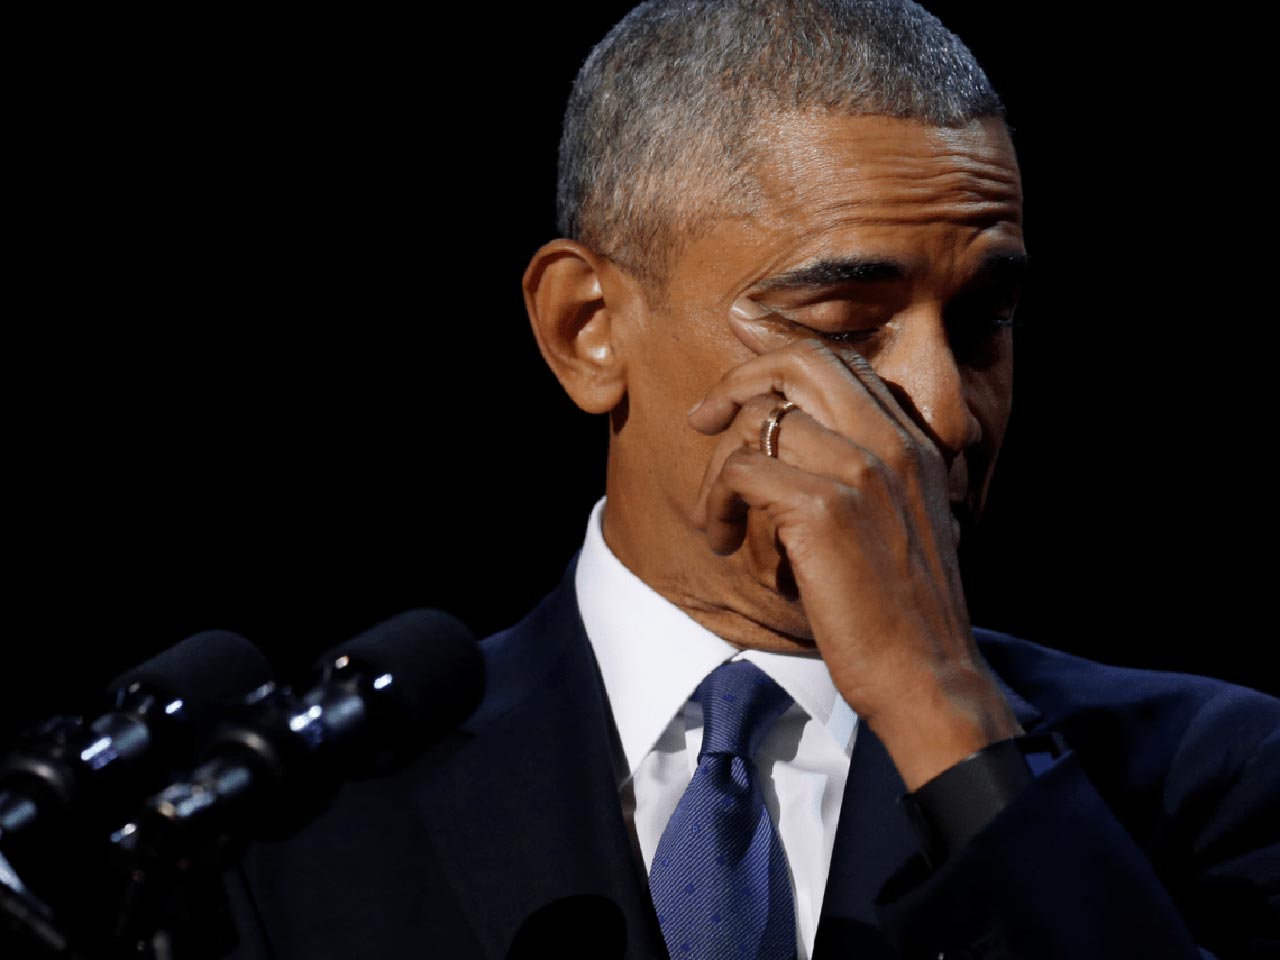 22 Photos From 2017 That Tell A Story: President Barack Obama break into tears while we was delivering his farewell speech in Chicago, Illinois.